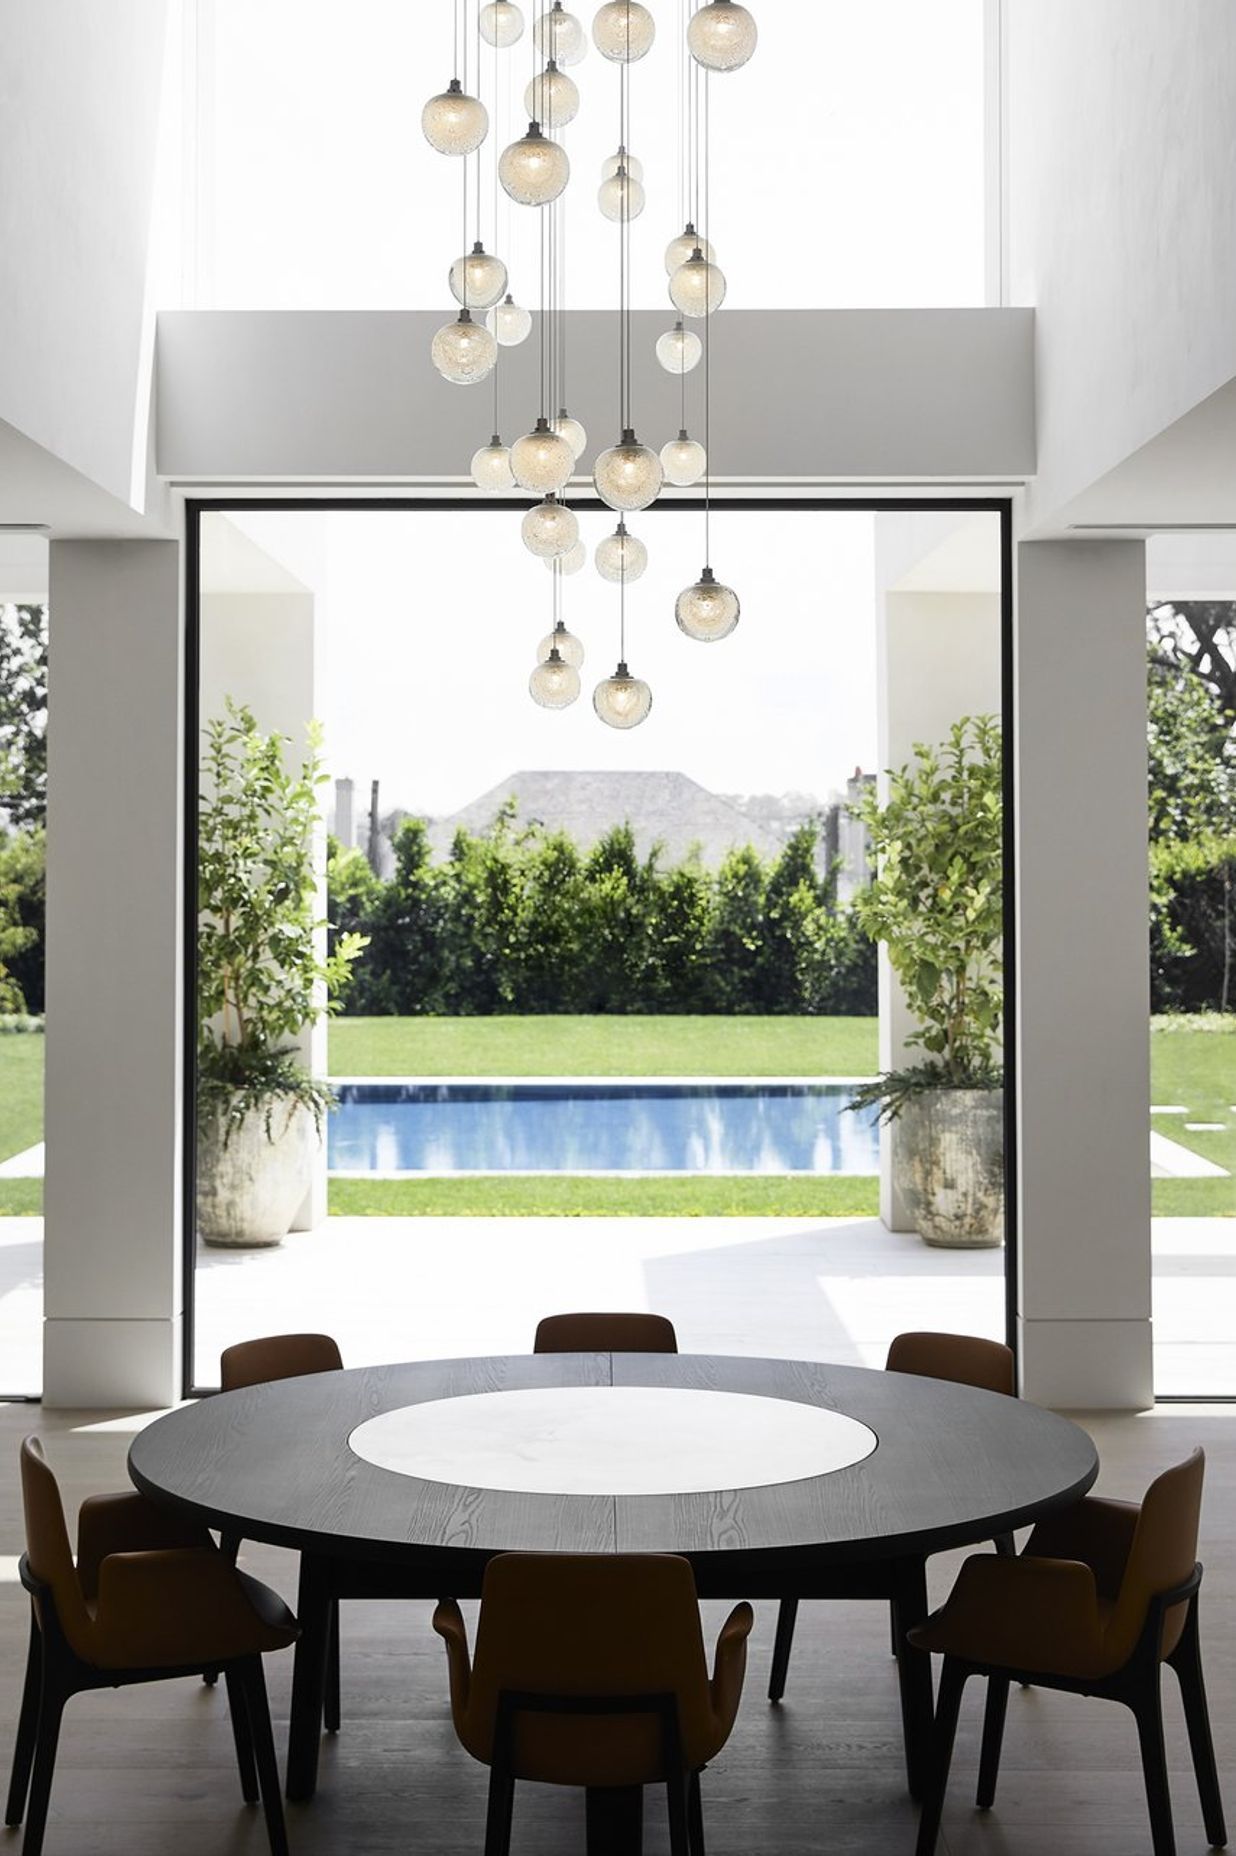 Toorak Gardens Residence by Conrad Architects | Photography by Sharyn Cairns